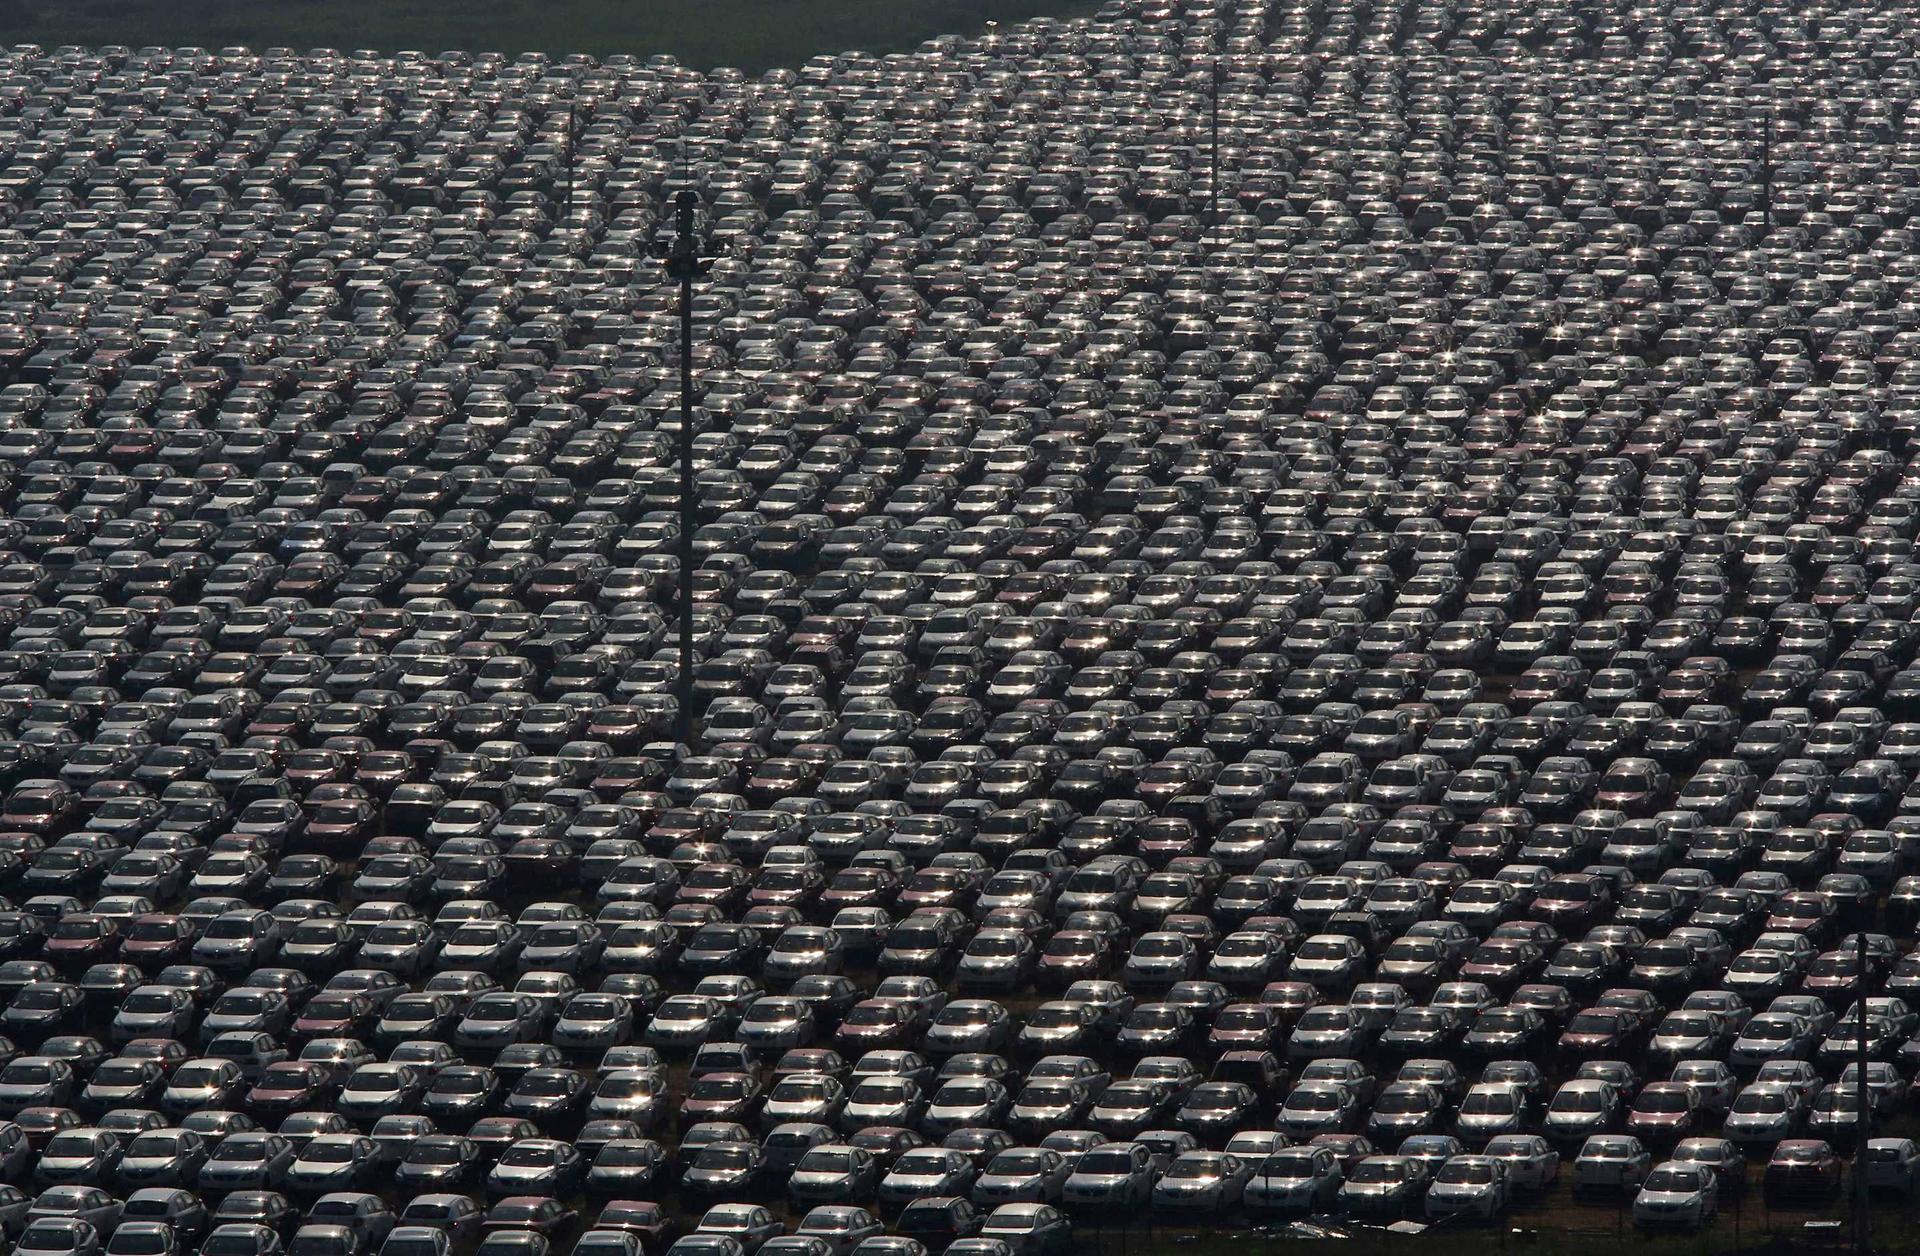 Beijing's investigations into possible antitrust violations across the car industry have involved more than 1,000 companies. Photo: Reuters